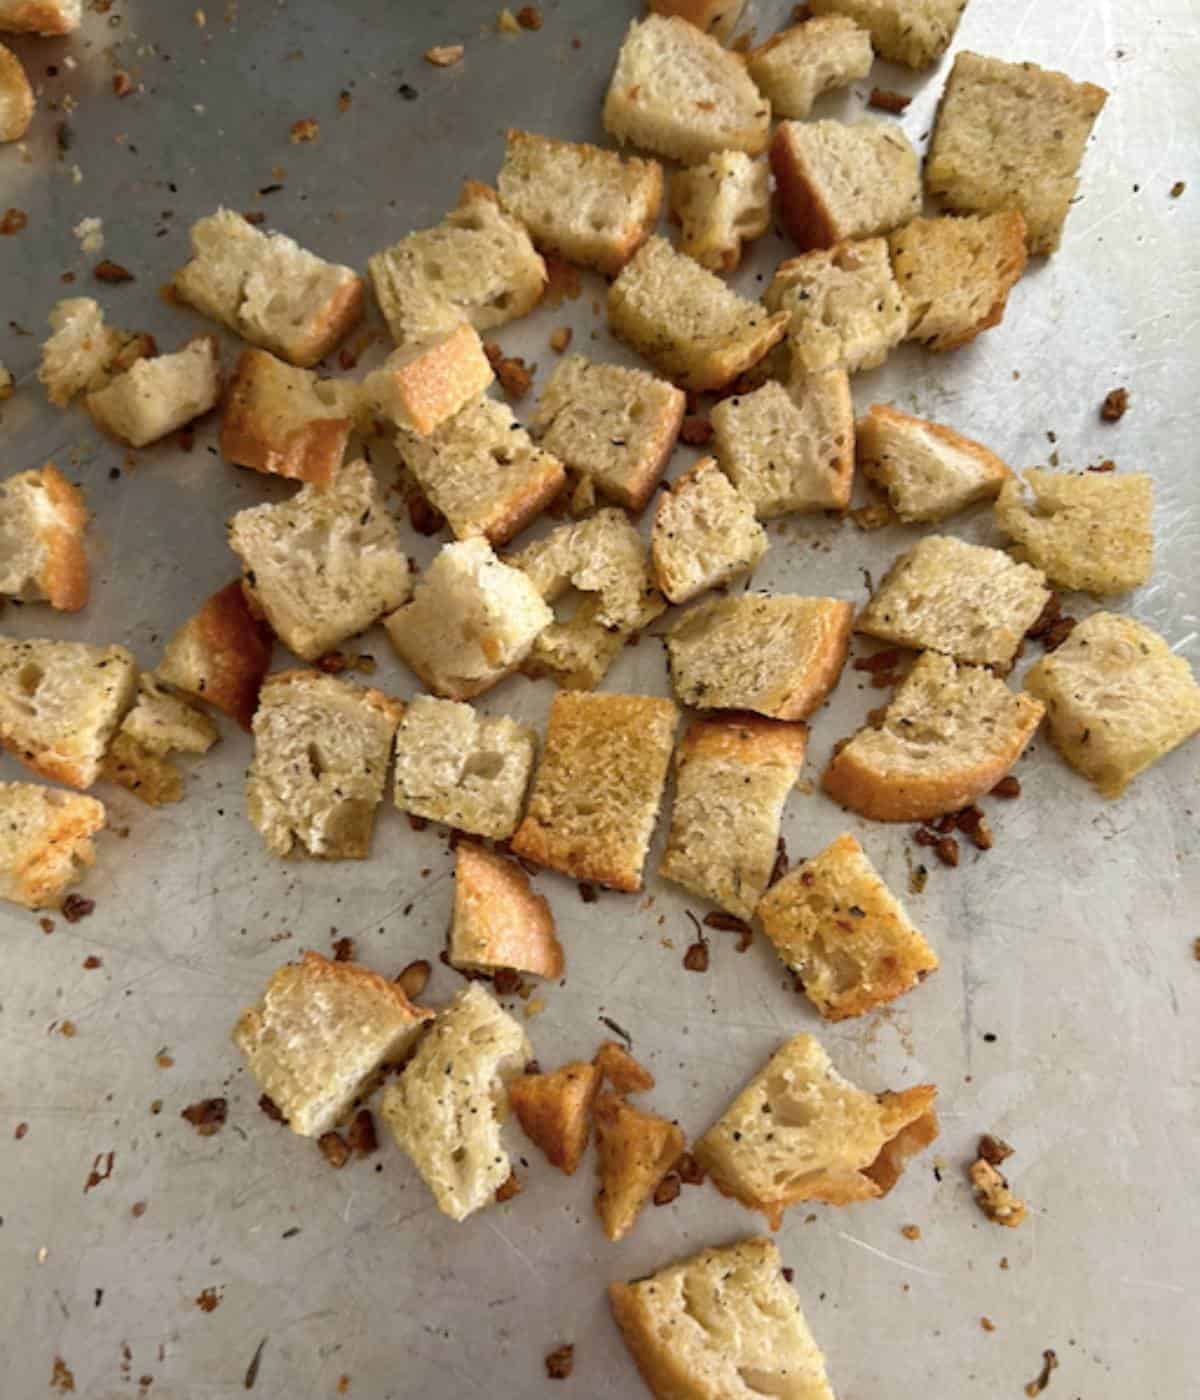 Toasted soup croutons on cookie sheet after baking.